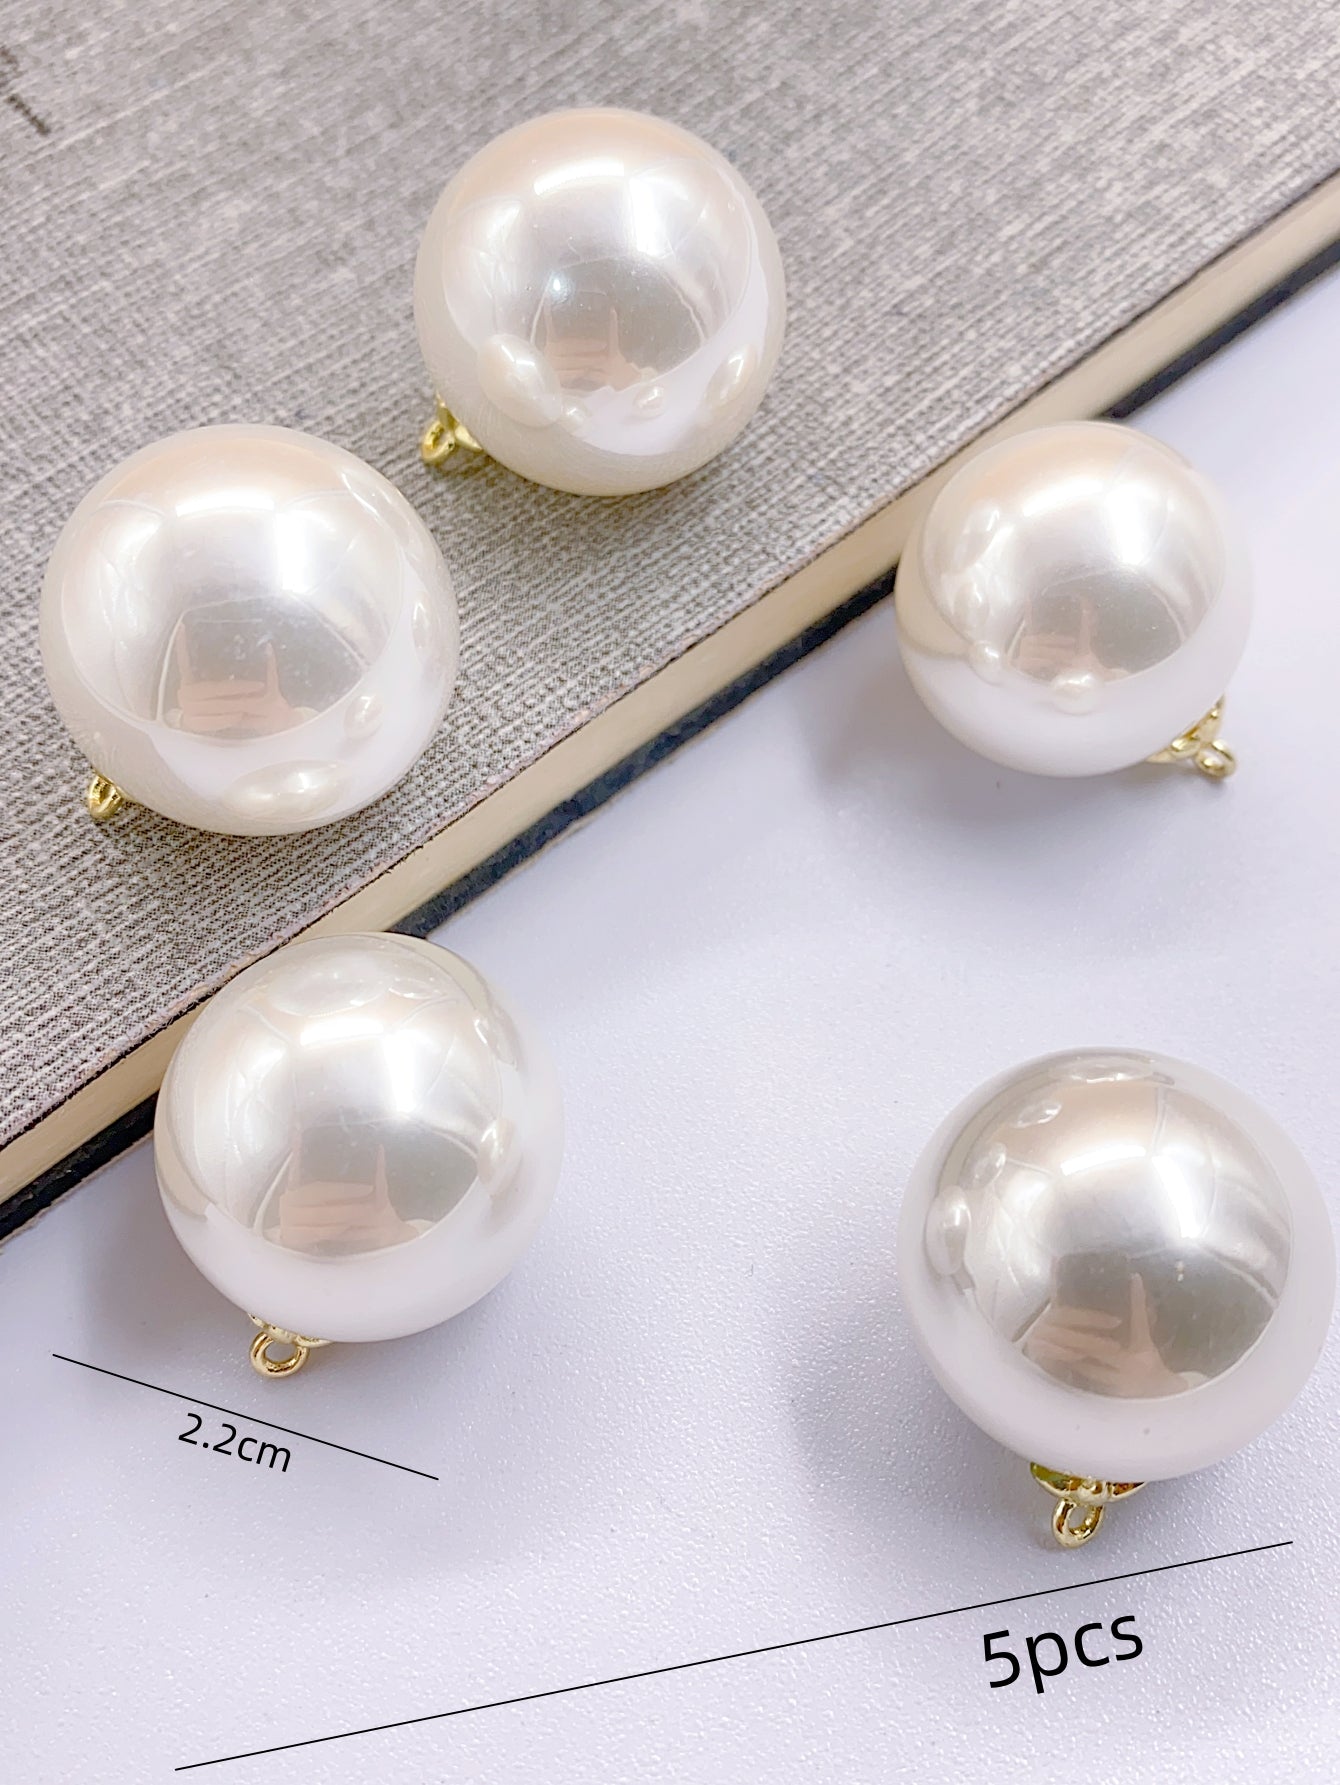 abs imitation pearl new fashion large round bead six claw alloy head hanging diy clothing jewelry accessories pendant pearl